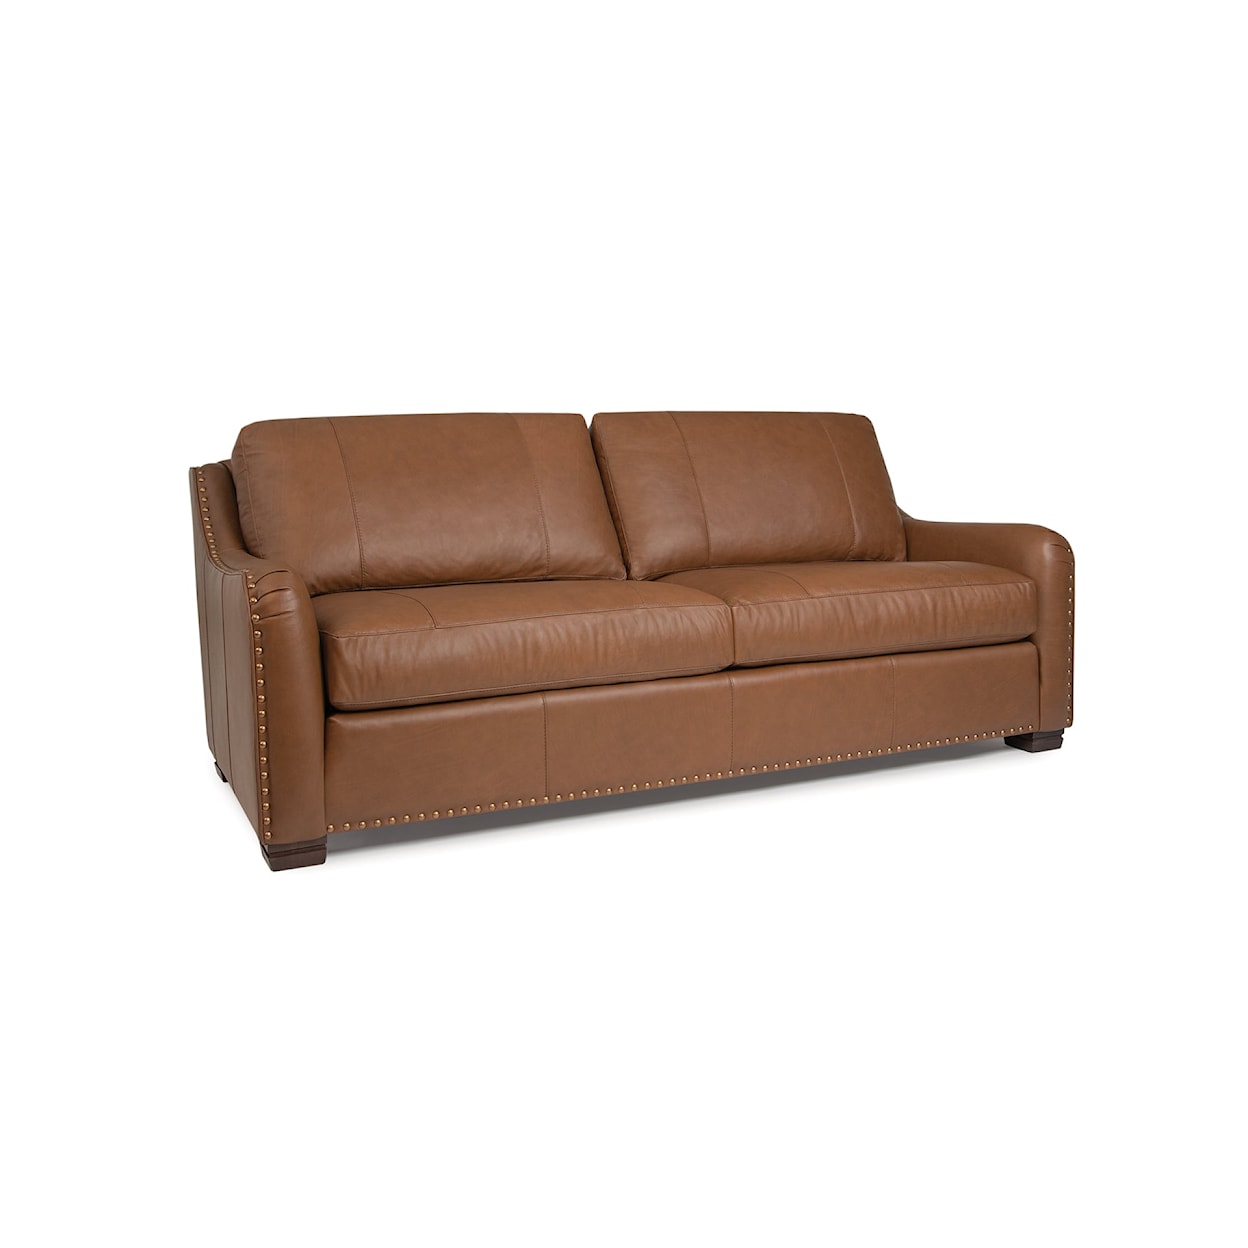 Smith Brothers Build Your Own 9000 Series Leather Sofa